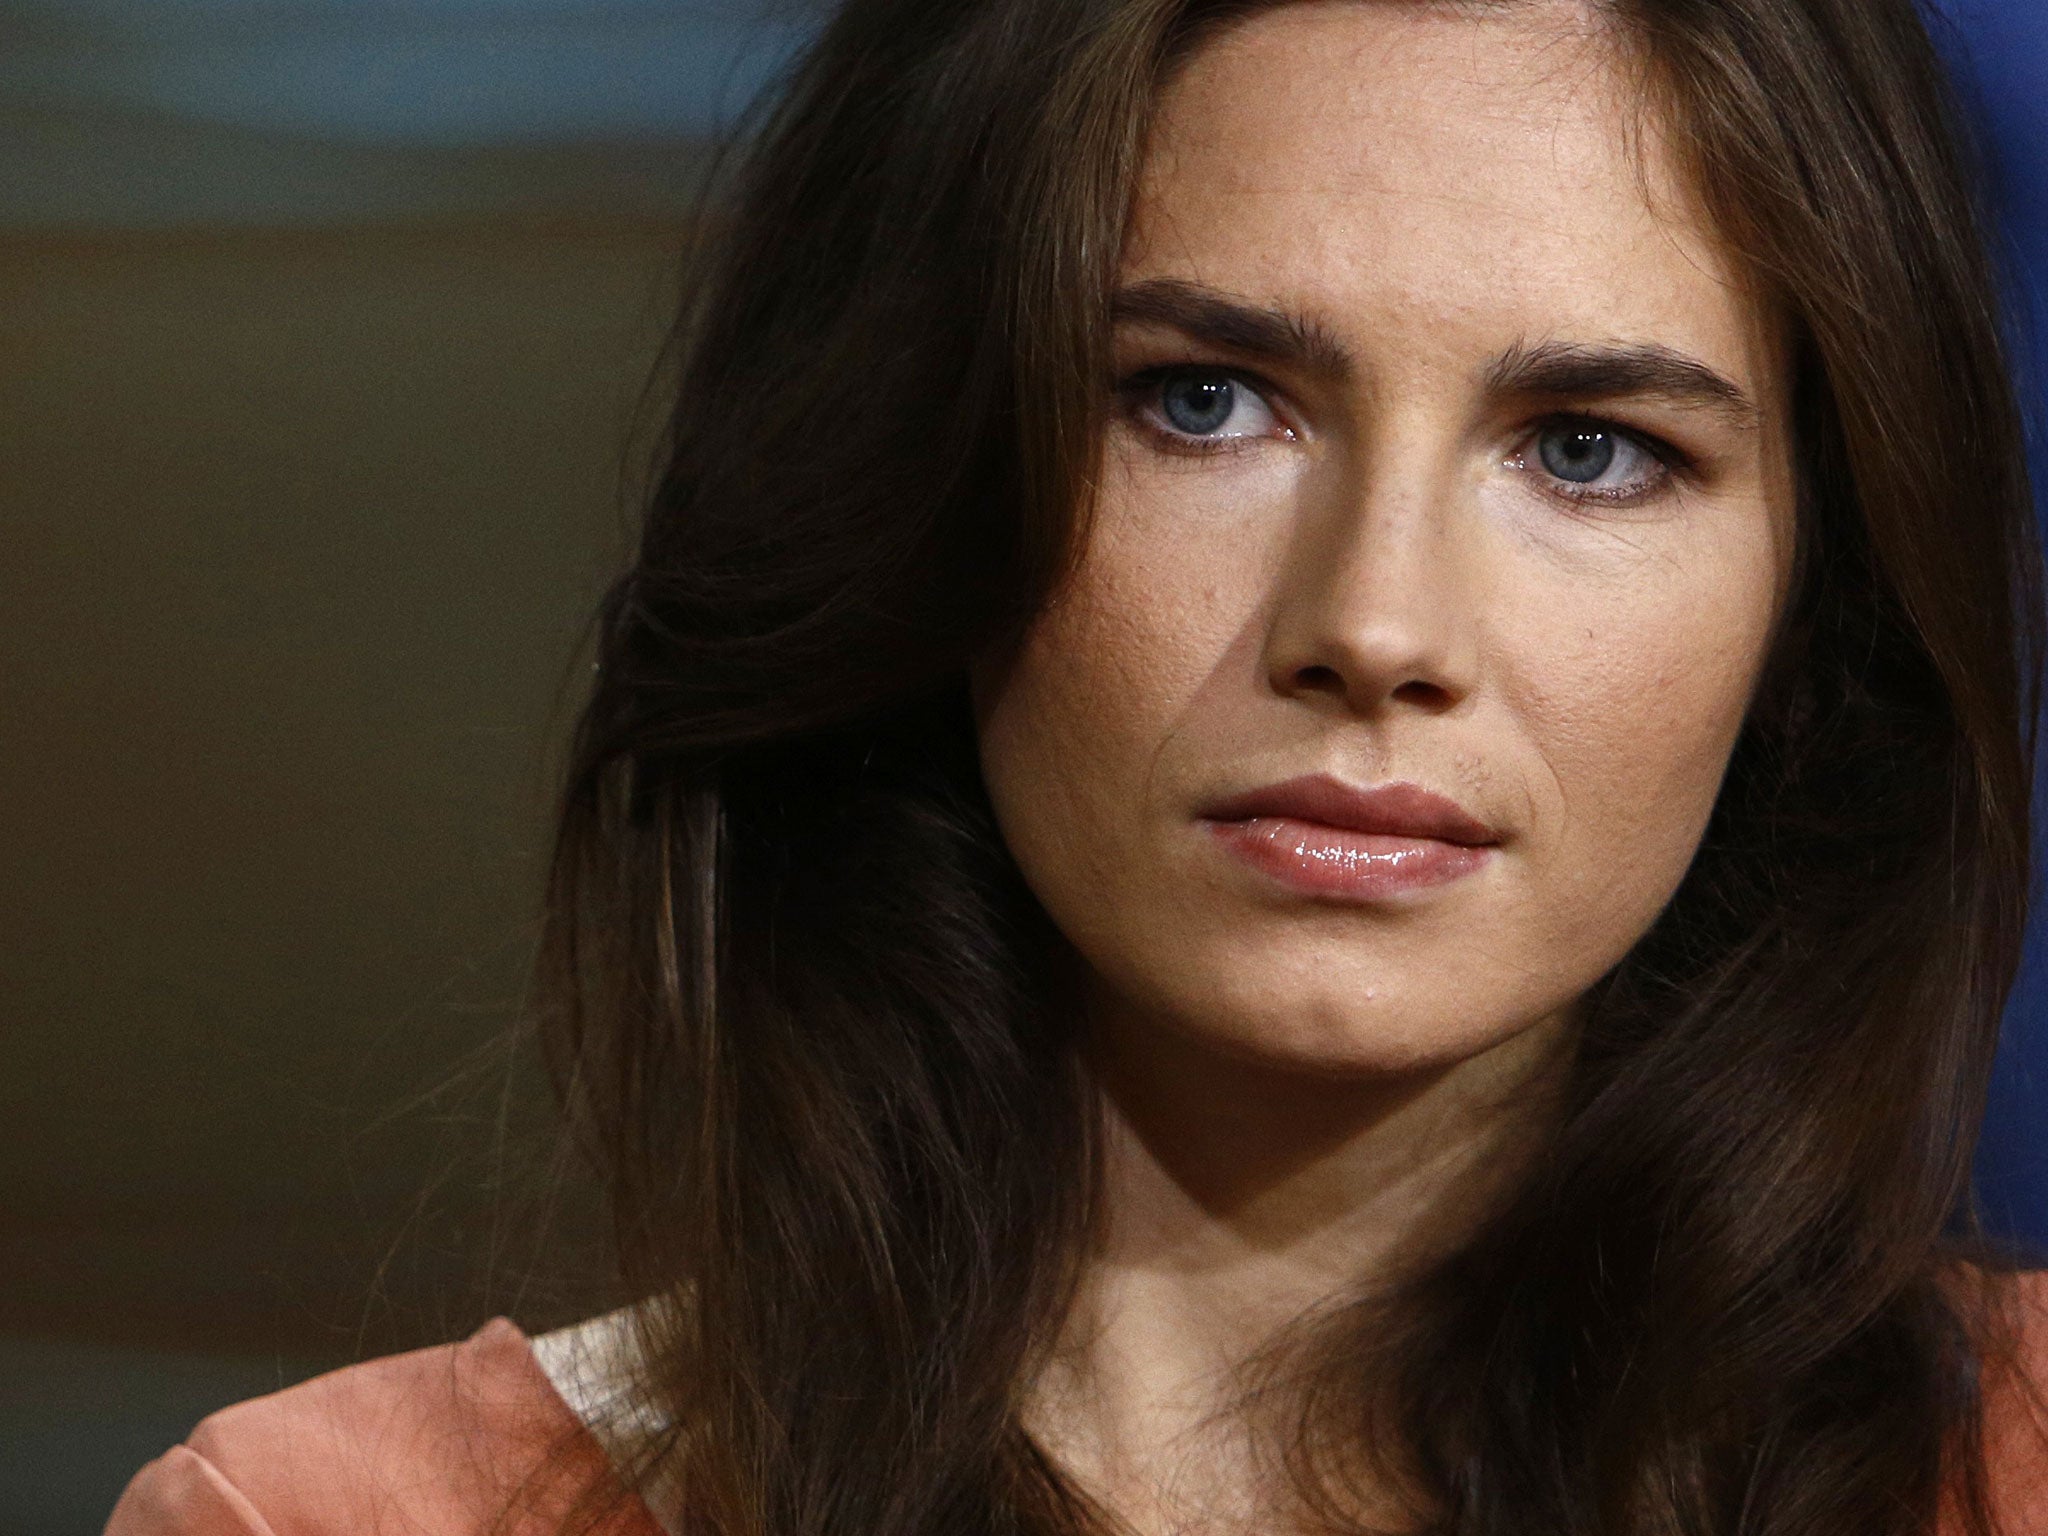 Amanda Knox has said she will not return to Italy for her and Raffaele Sollecito's retrial over the death of Meredith Kercher